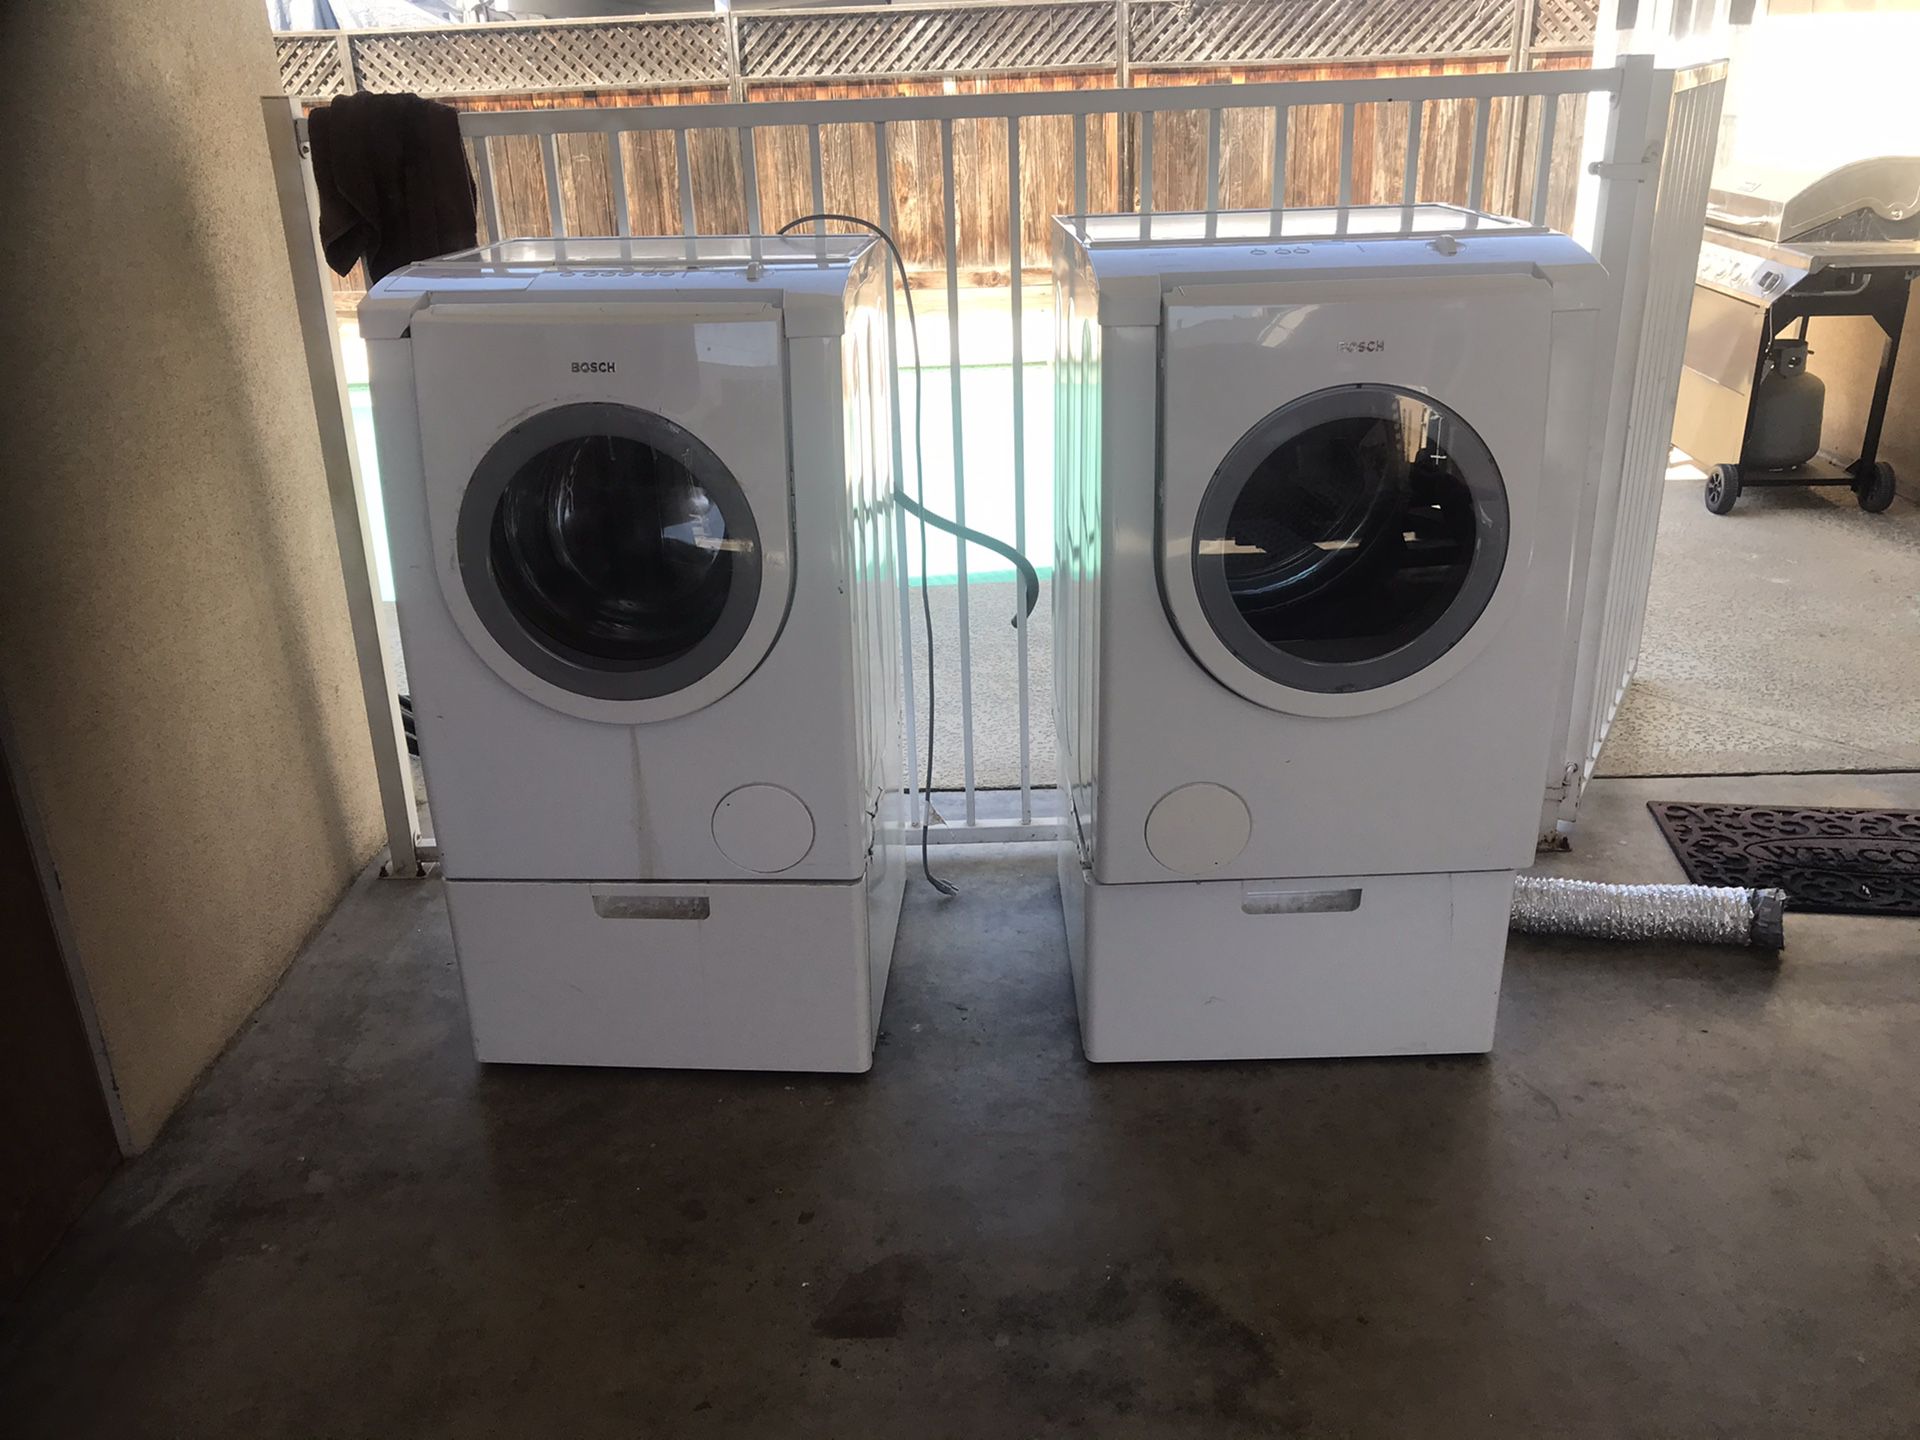 Selling as a set BOSCH Washer and Dryer work good just bought new ones 250.00 firm